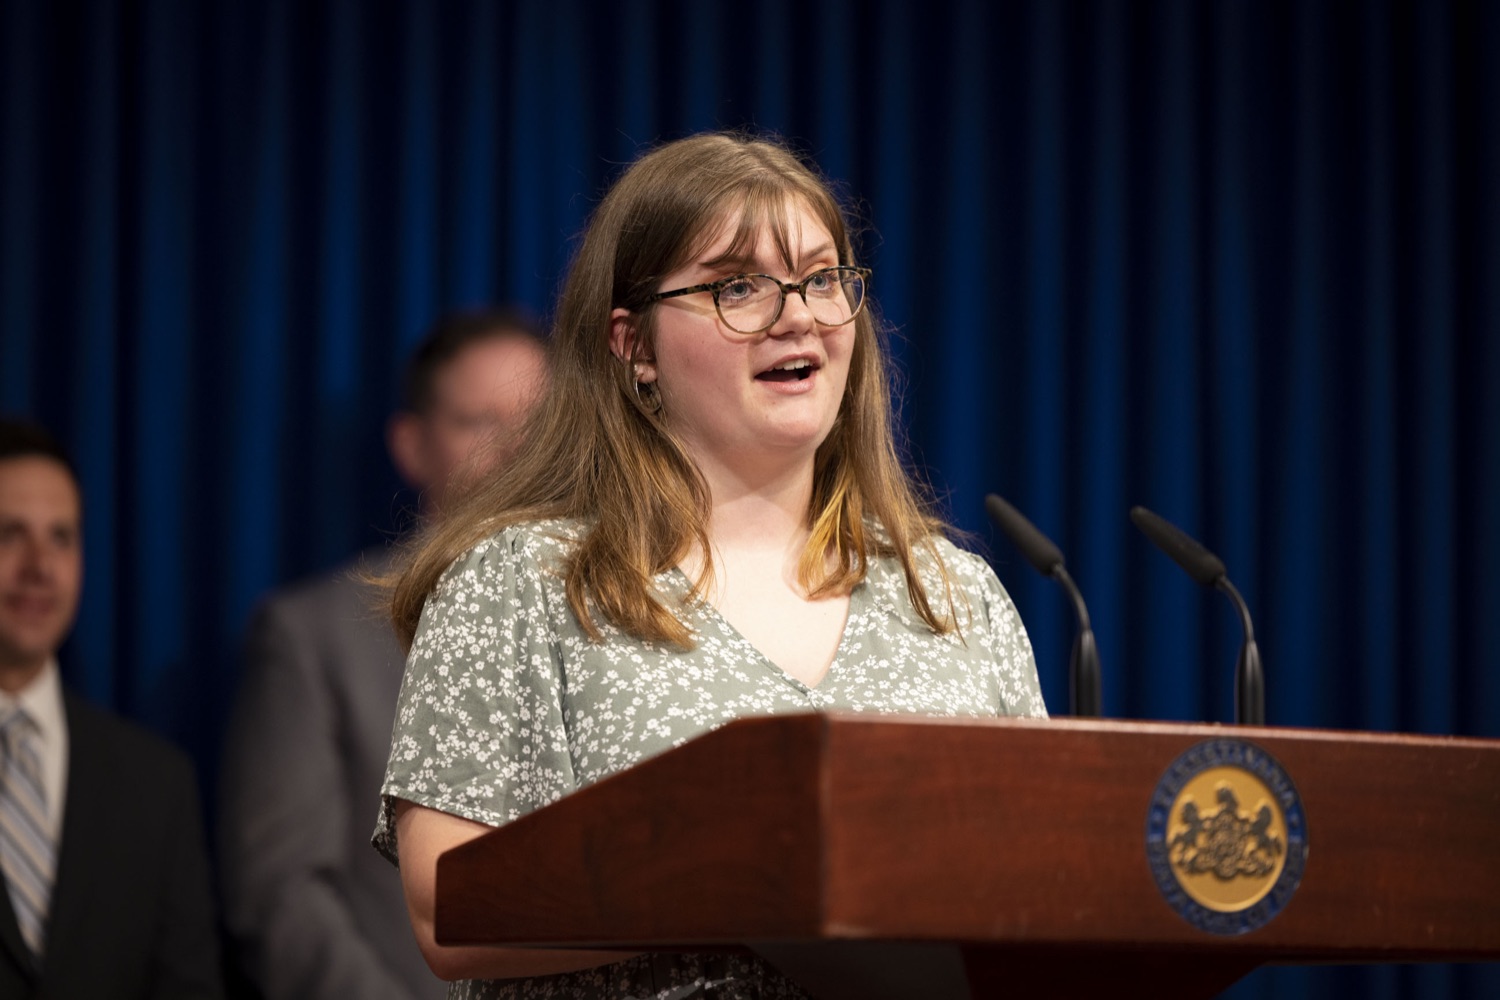 Abigail Mack, a Ligonier Valley School District High School Senior, describes her experience with financial literacy education and how it helped her save for future education expenses, in Harrisburg, PA on May 22, 2023.<br><a href="https://filesource.amperwave.net/commonwealthofpa/photo/23016_audGen_financialLiteracy_09.jpg" target="_blank">⇣ Download Photo</a>